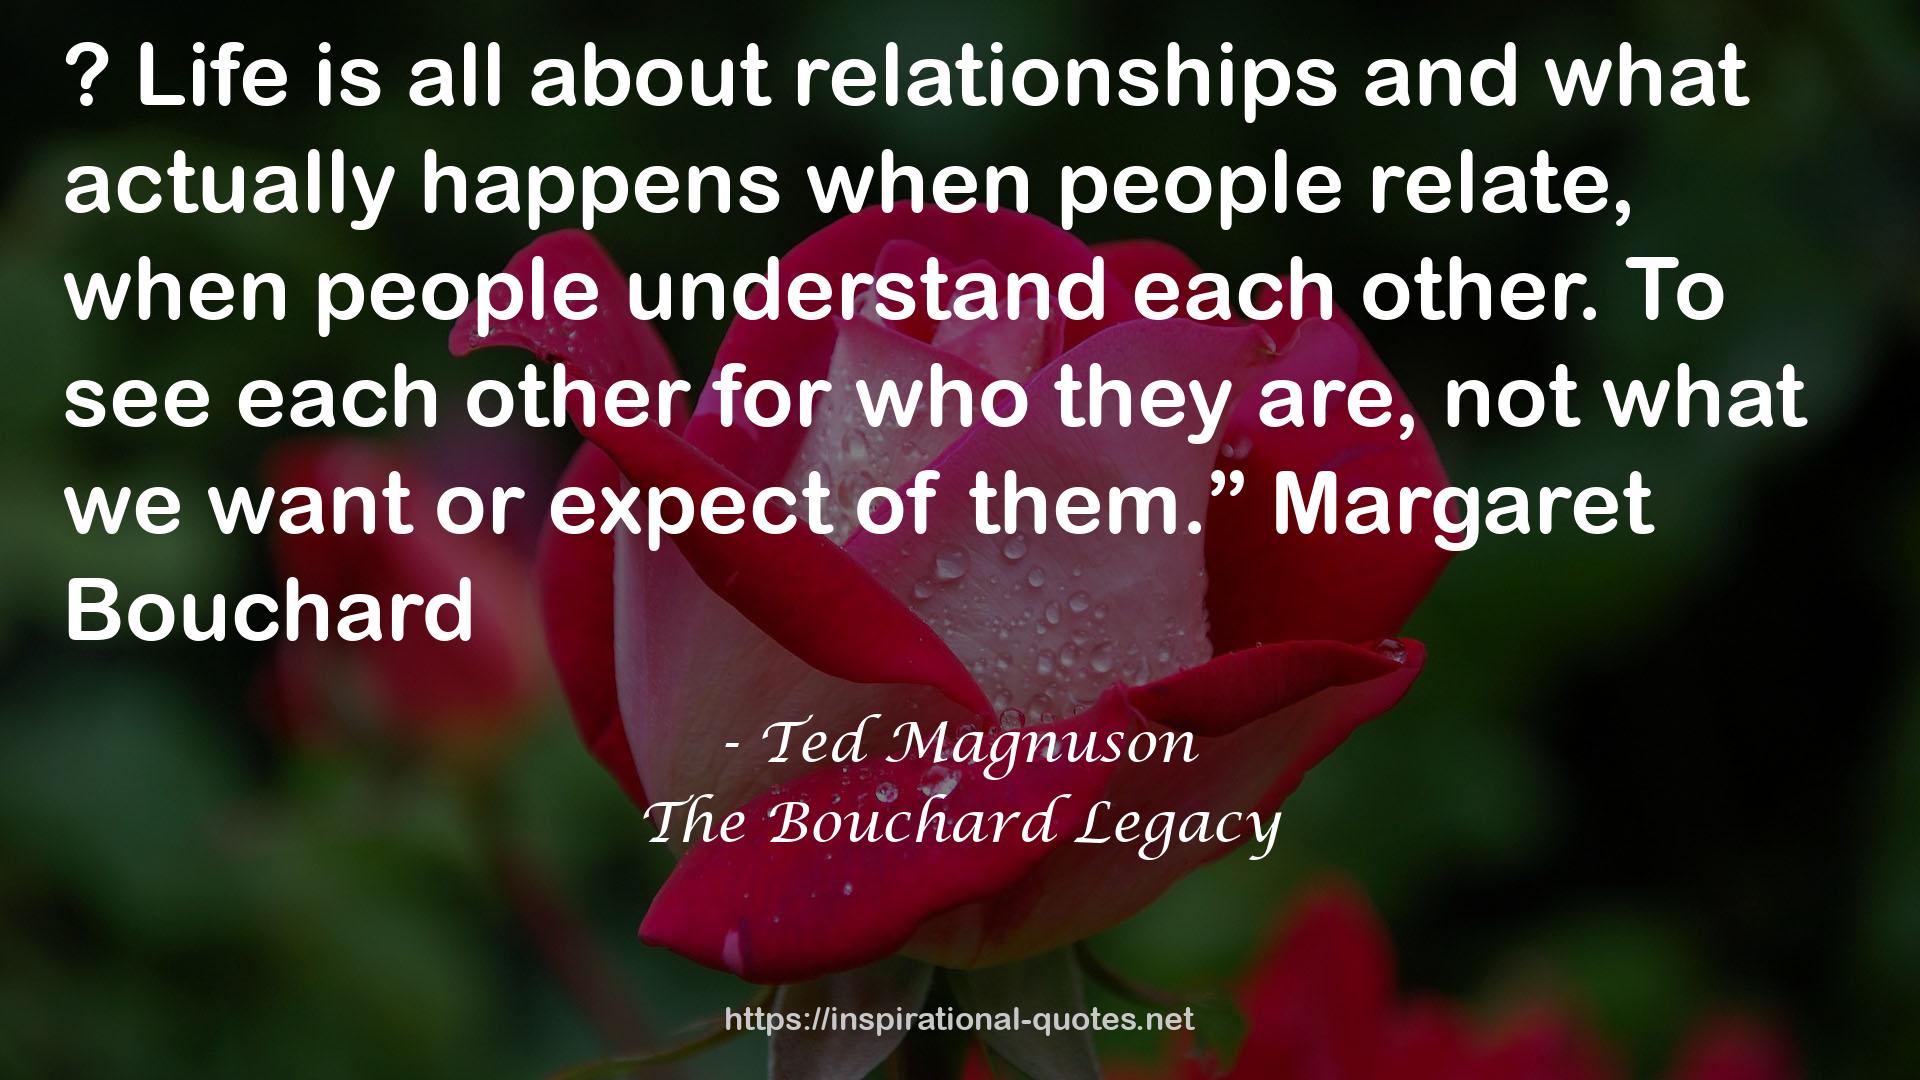 Ted Magnuson QUOTES